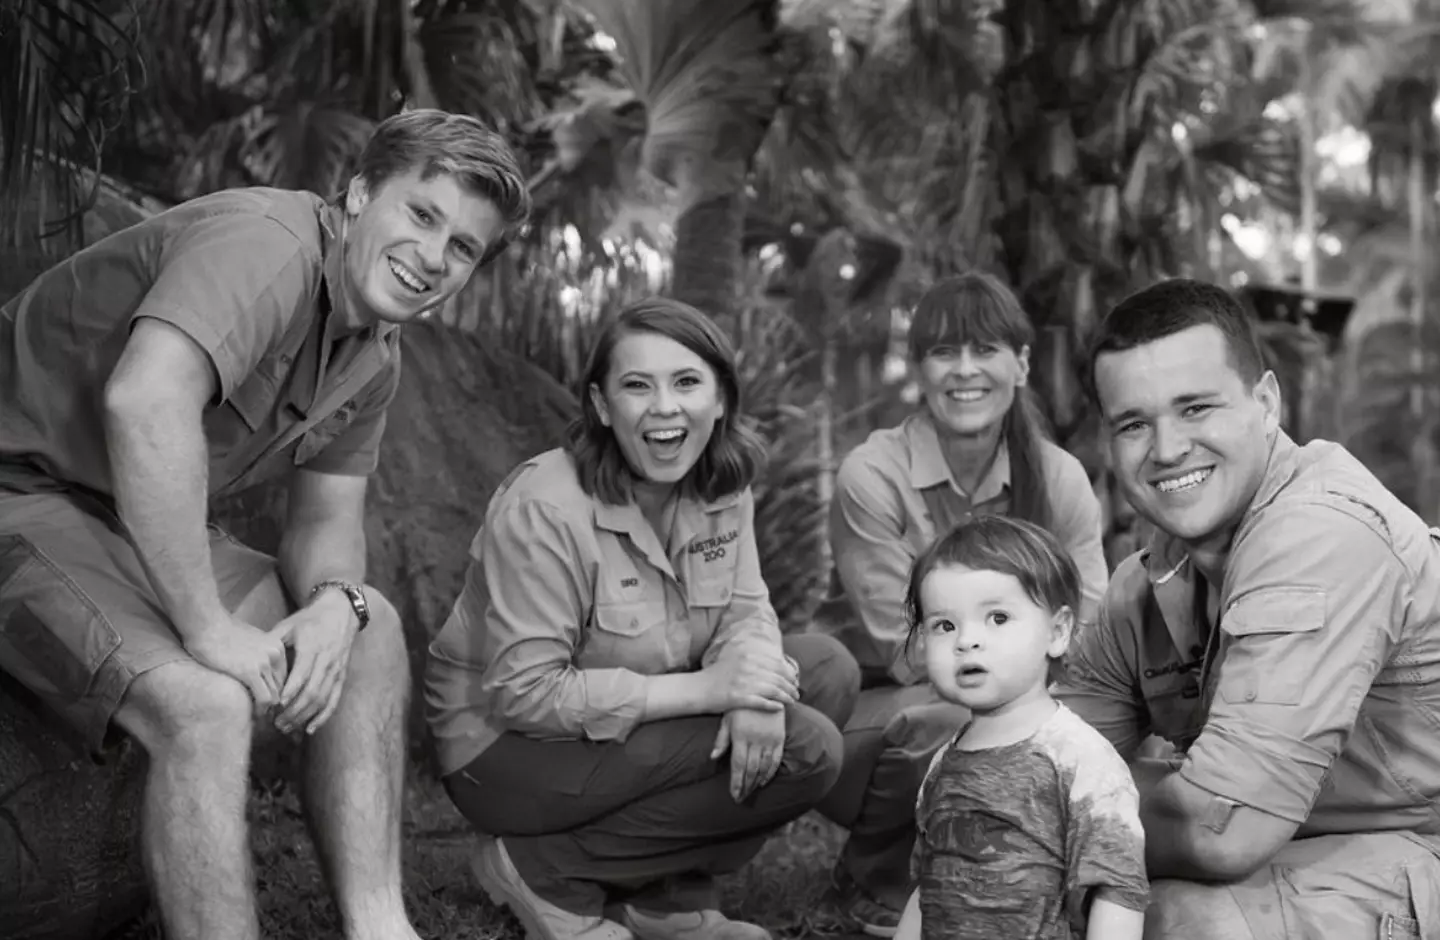 The Irwin family have worked hard to keep Steve's legacy alive at Australia Zoo.